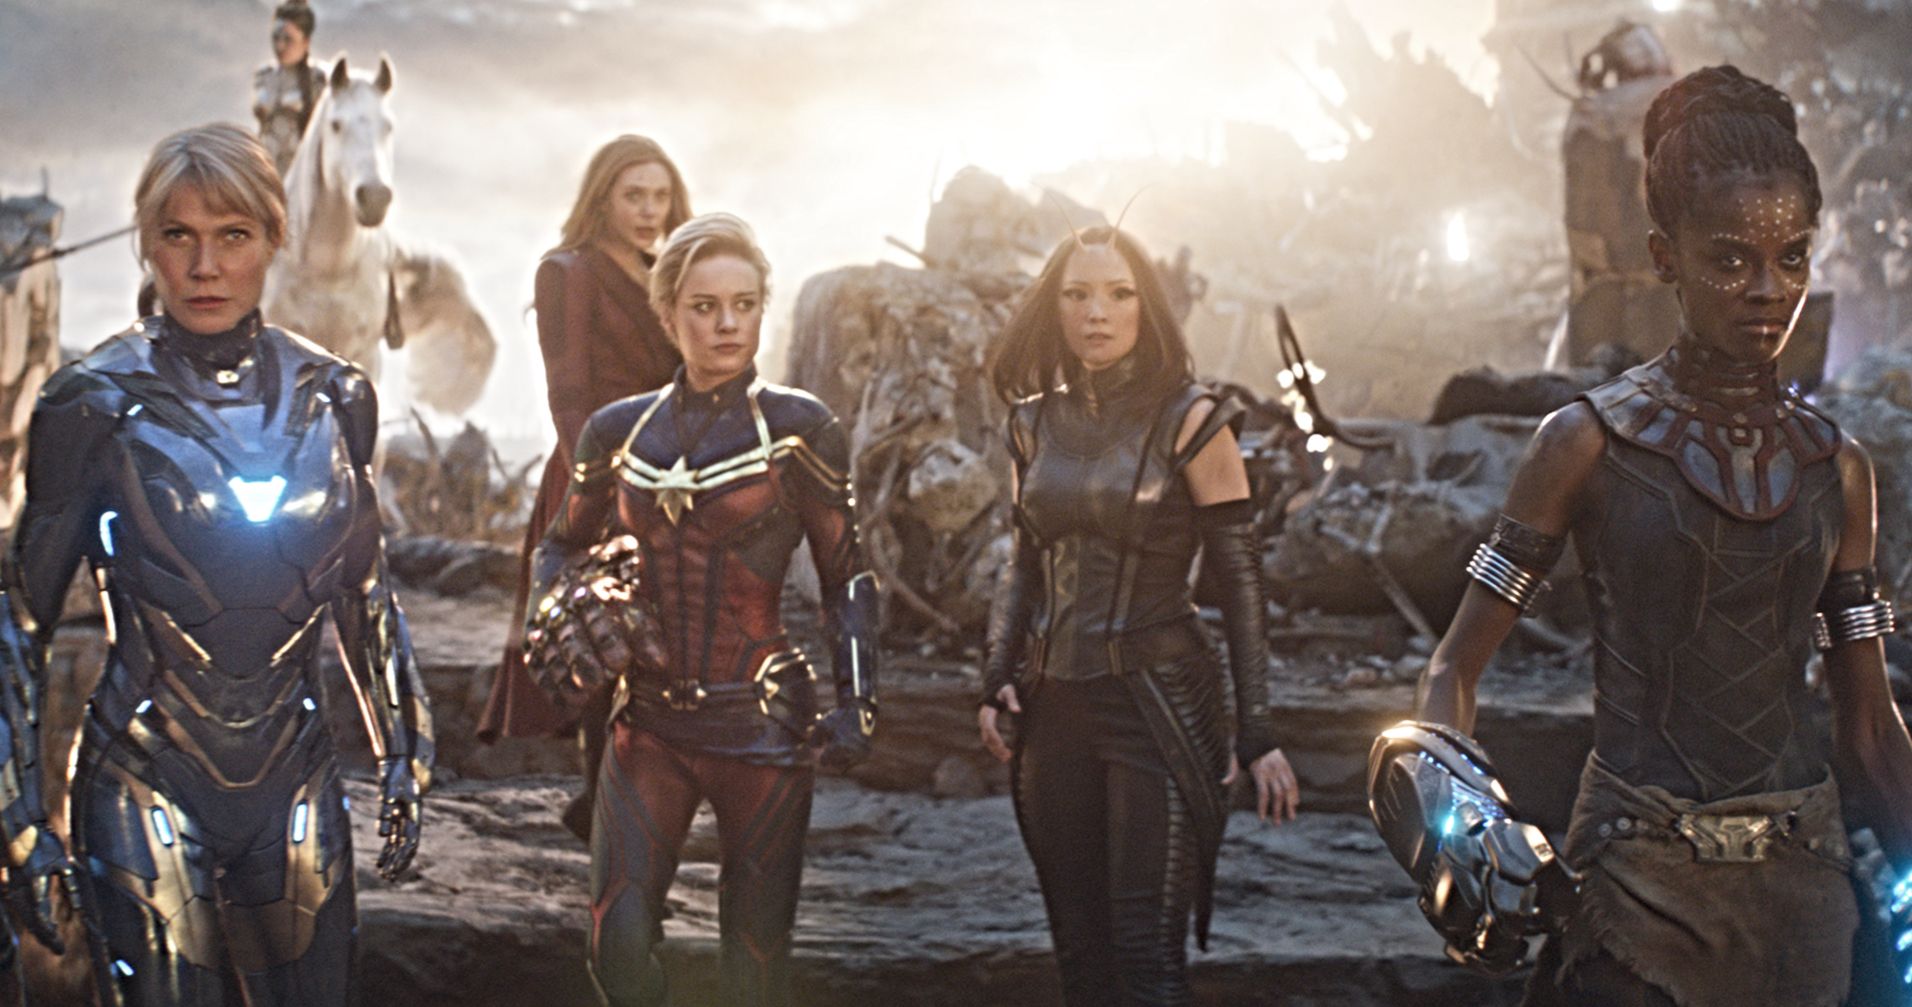 Marvel Troll Cuts All Women Out of Avengers: Endgame Only to Prove How Crucial They Are